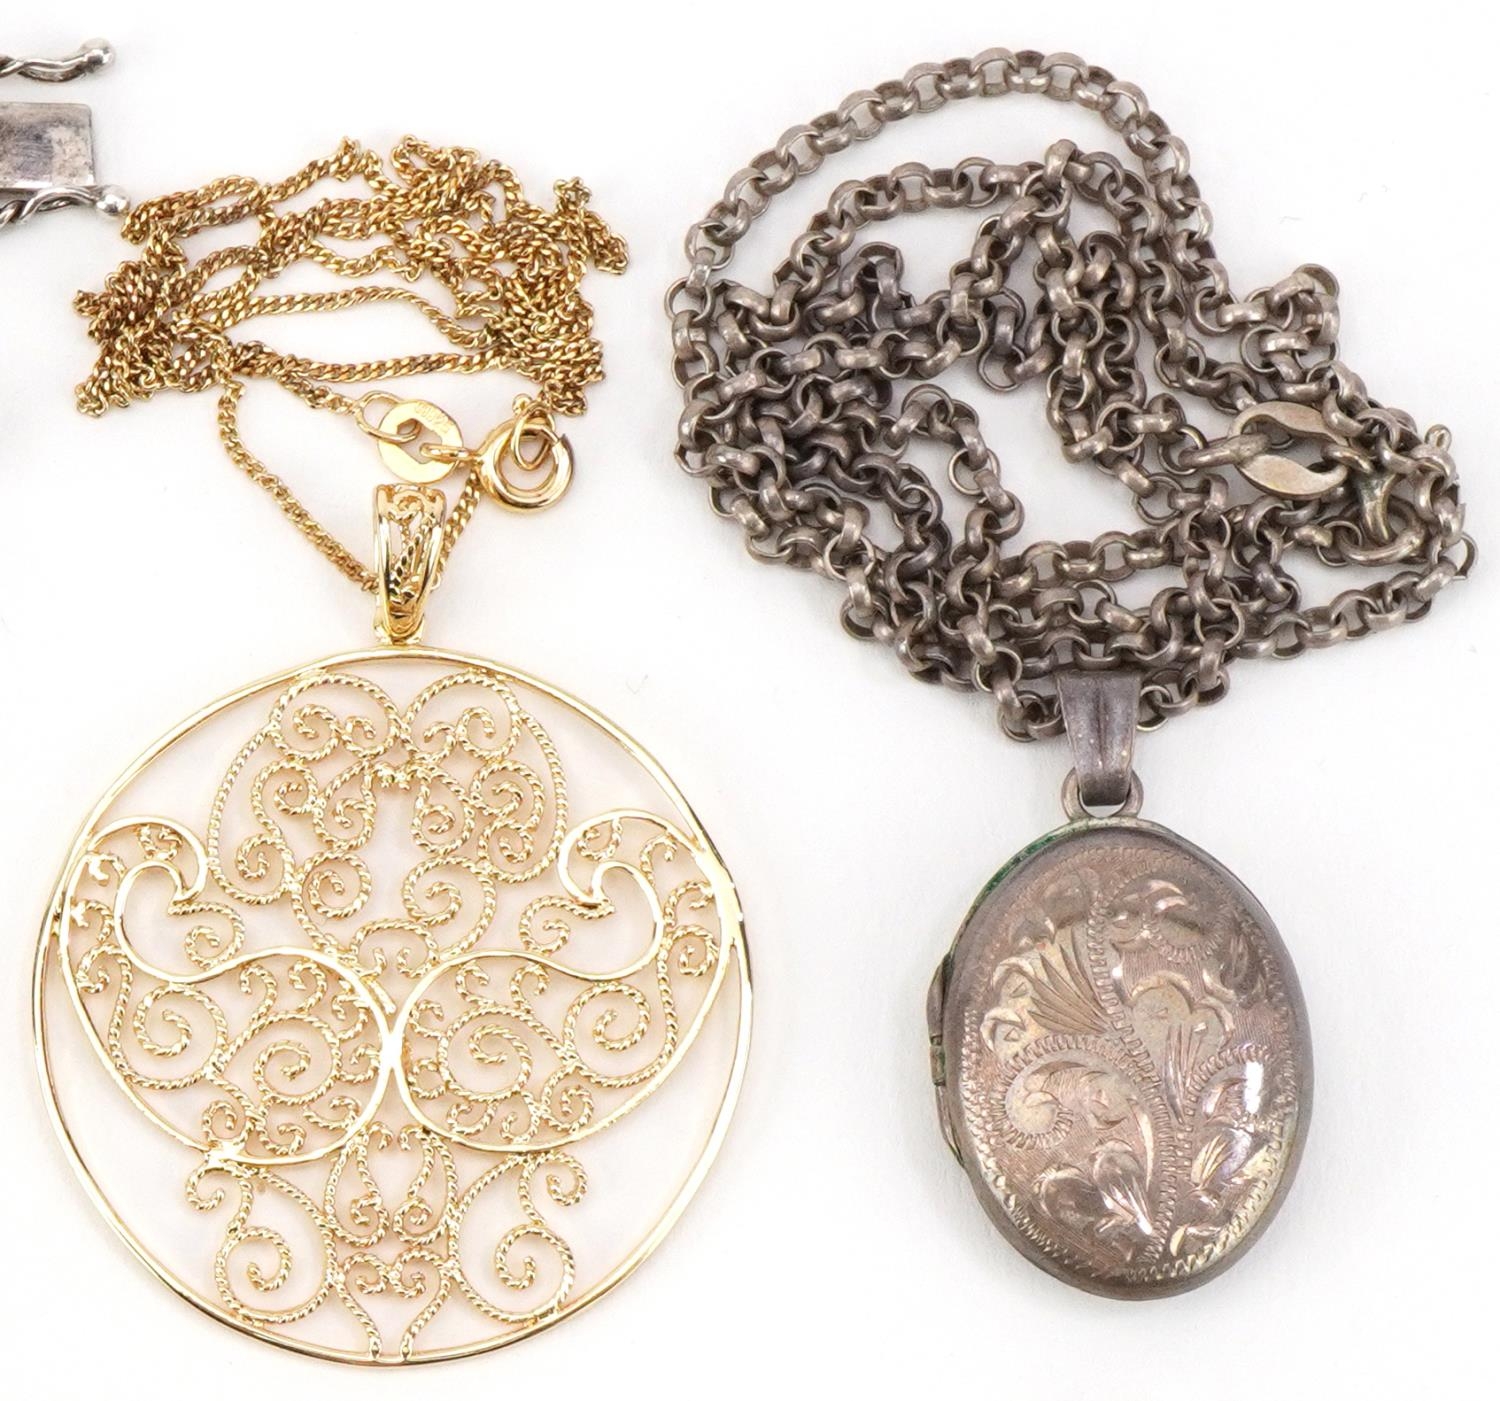 Vintage and later silver and white metal jewellery including a charm bracelet, floral engraved - Image 3 of 5